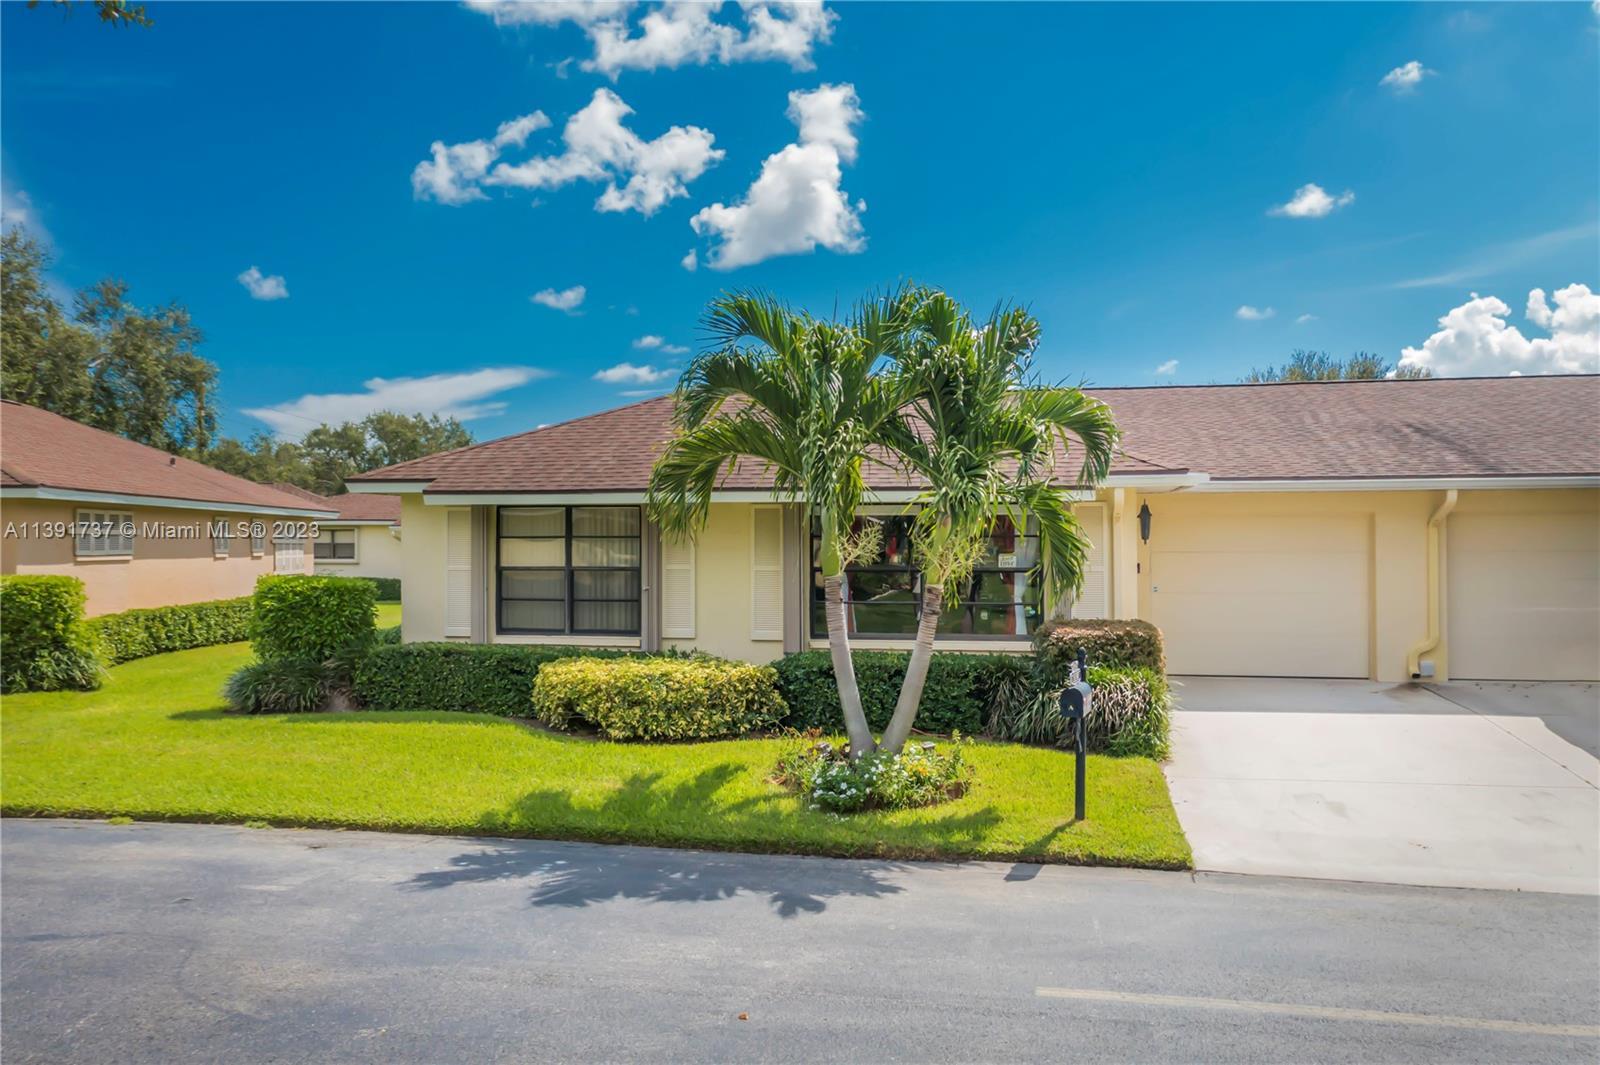 SELLER IS MOTIVATED TO SELL FAST. Enjoy the beautiful Florida Sunsets from the comfort of your own V